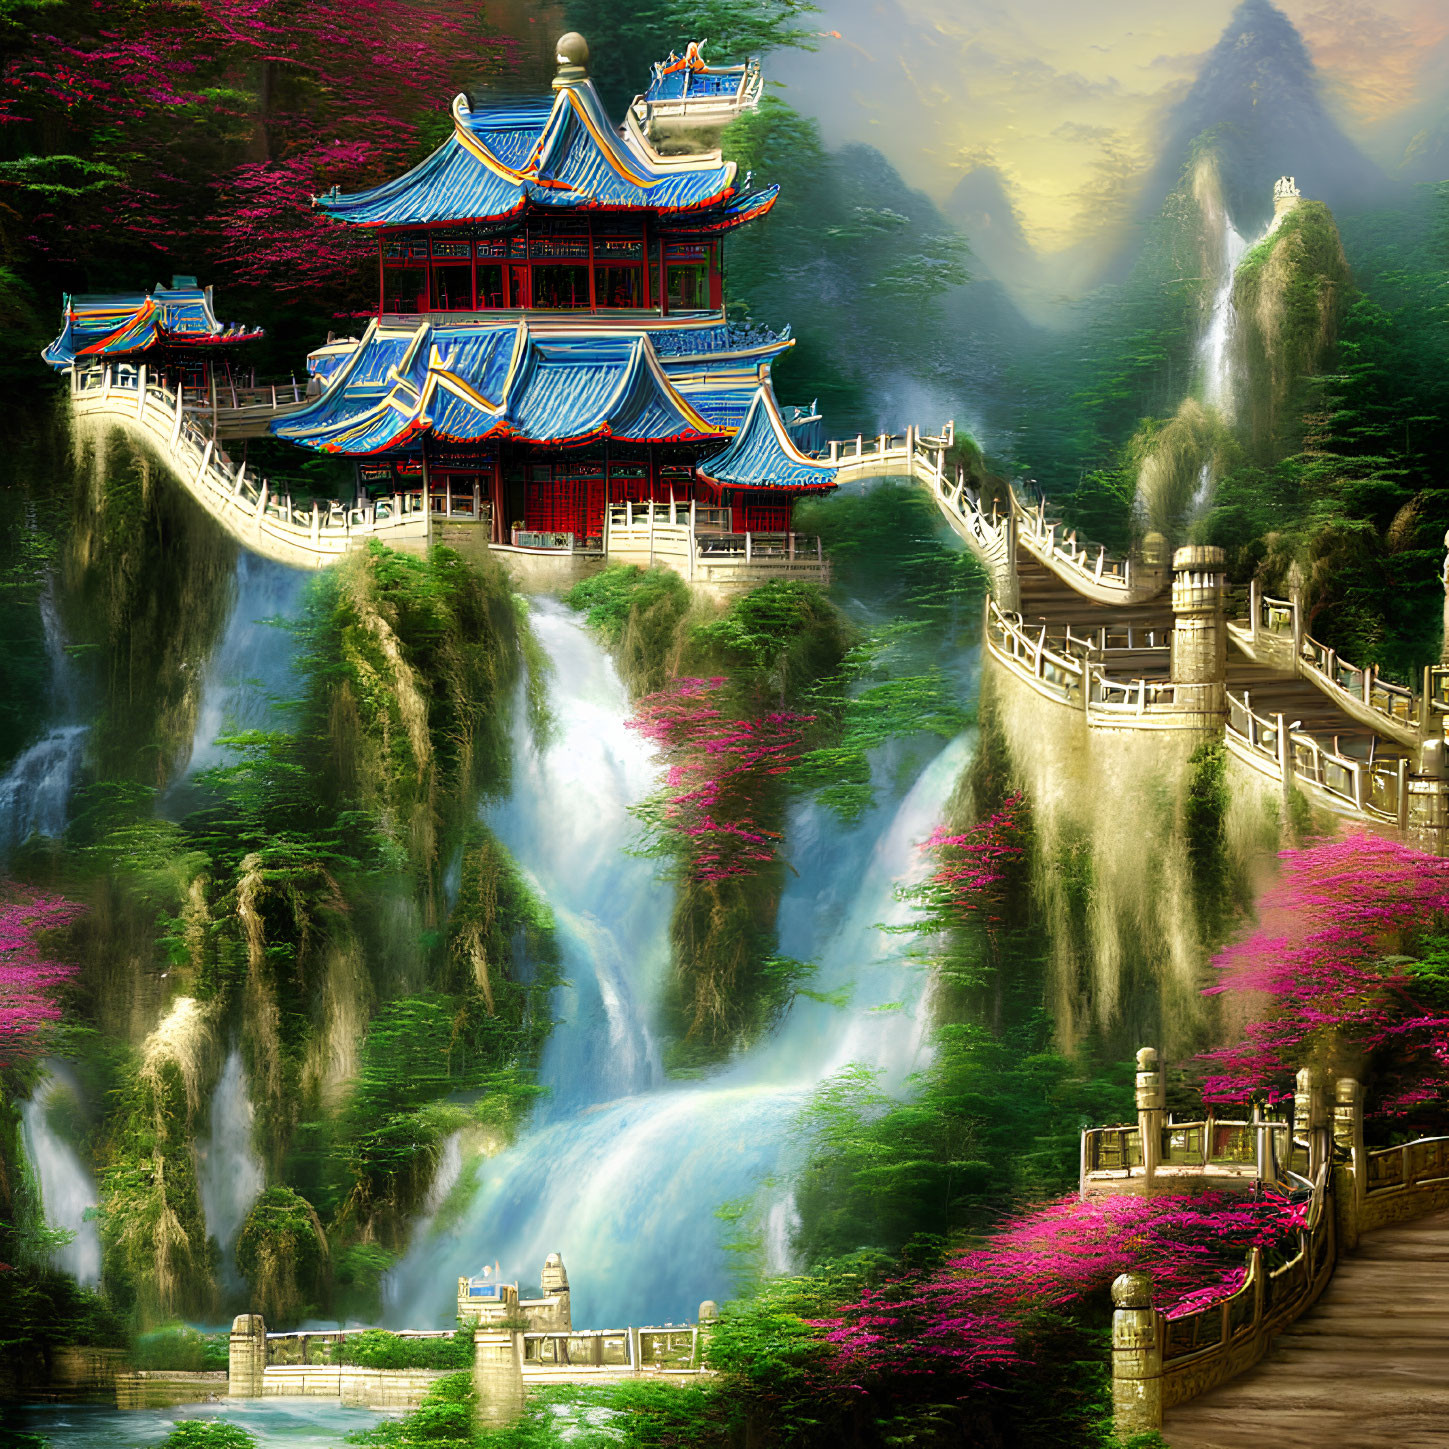 Asian temple with blue roofs, waterfalls, greenery, pink blossoms, misty mountains